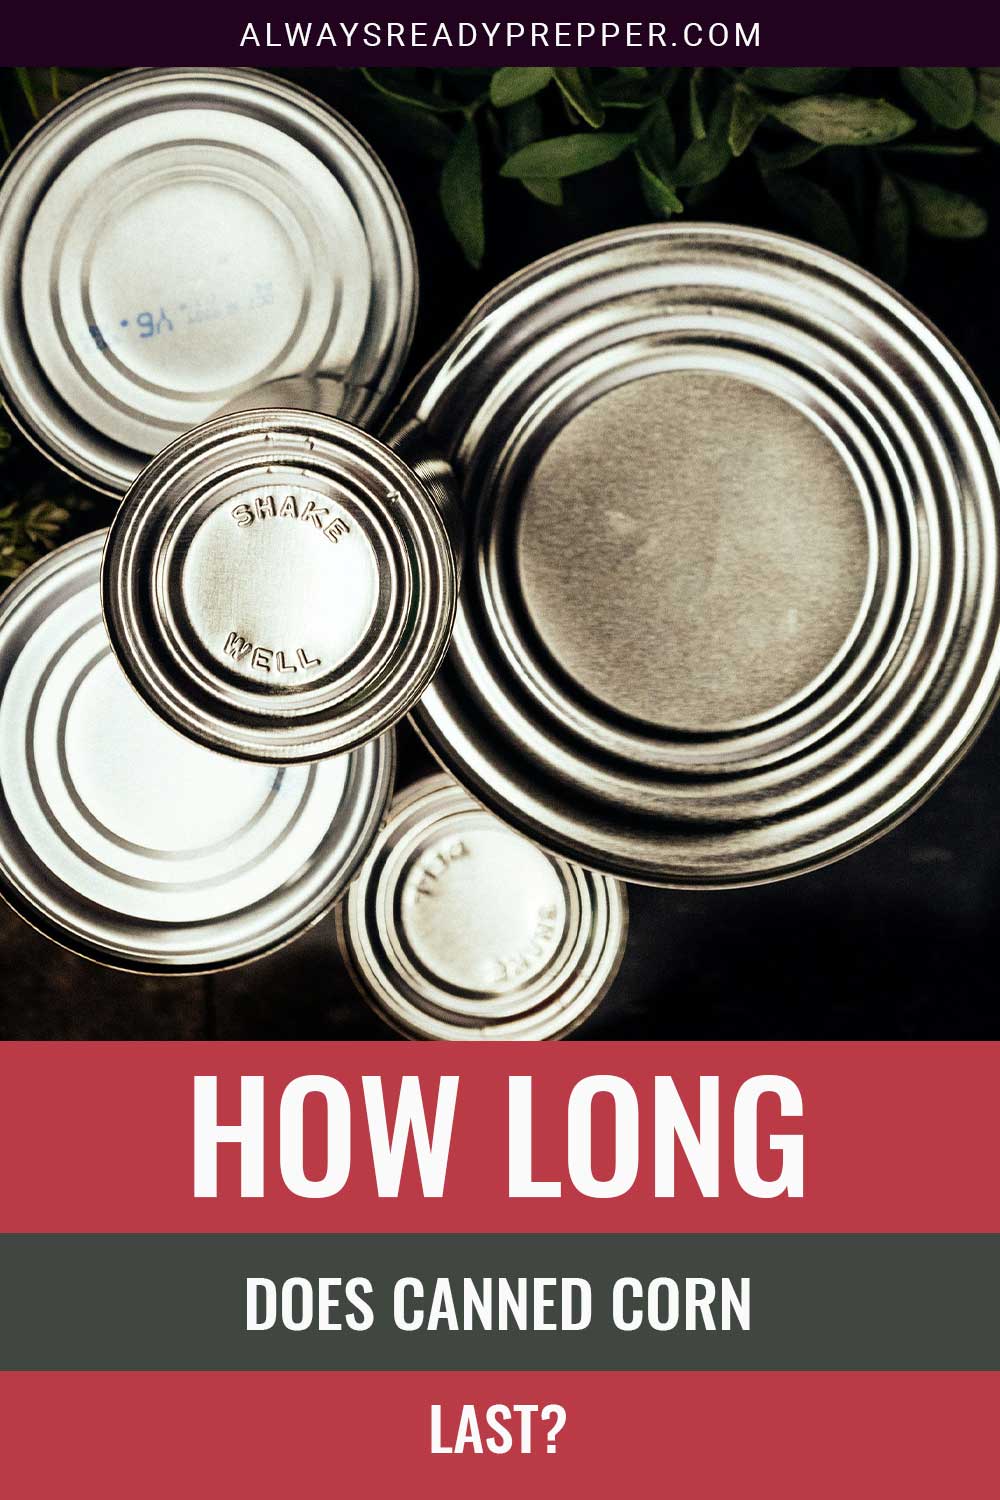 5 Food cans stacked together - How Long Does Canned Corn Last?